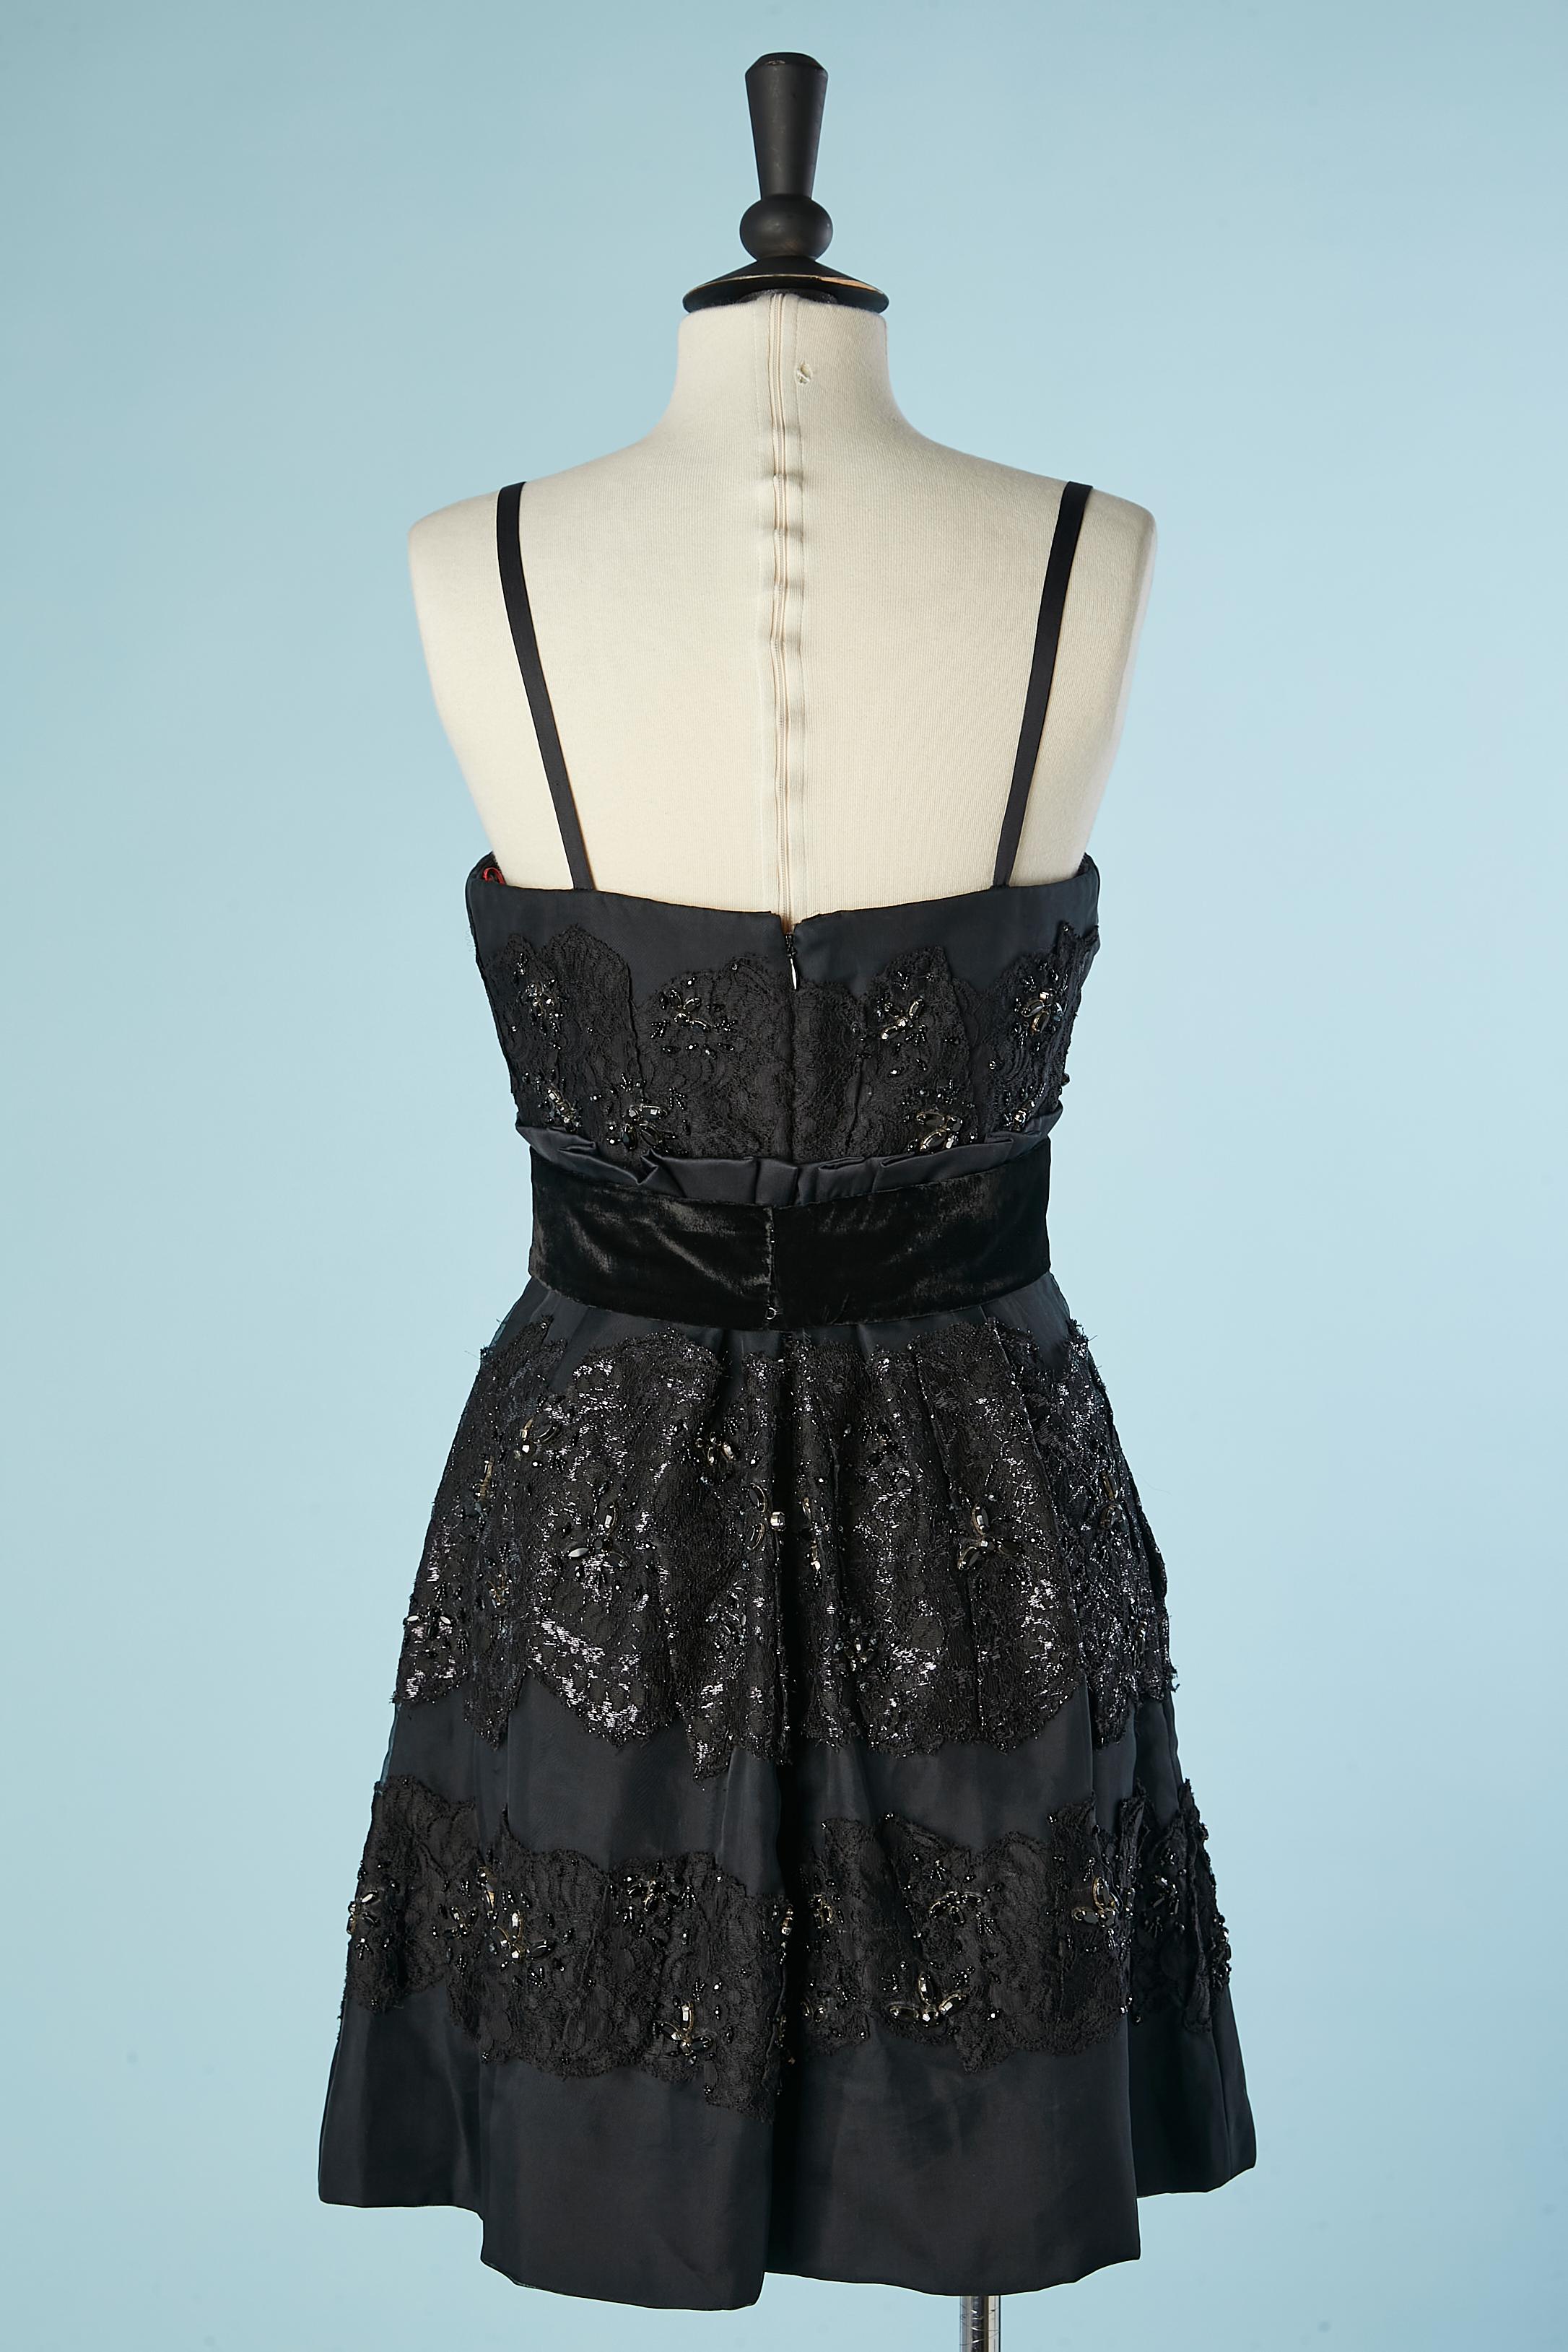 Black cocktail dress with lace, beads and velvet belt Christian Lacroix  For Sale 1